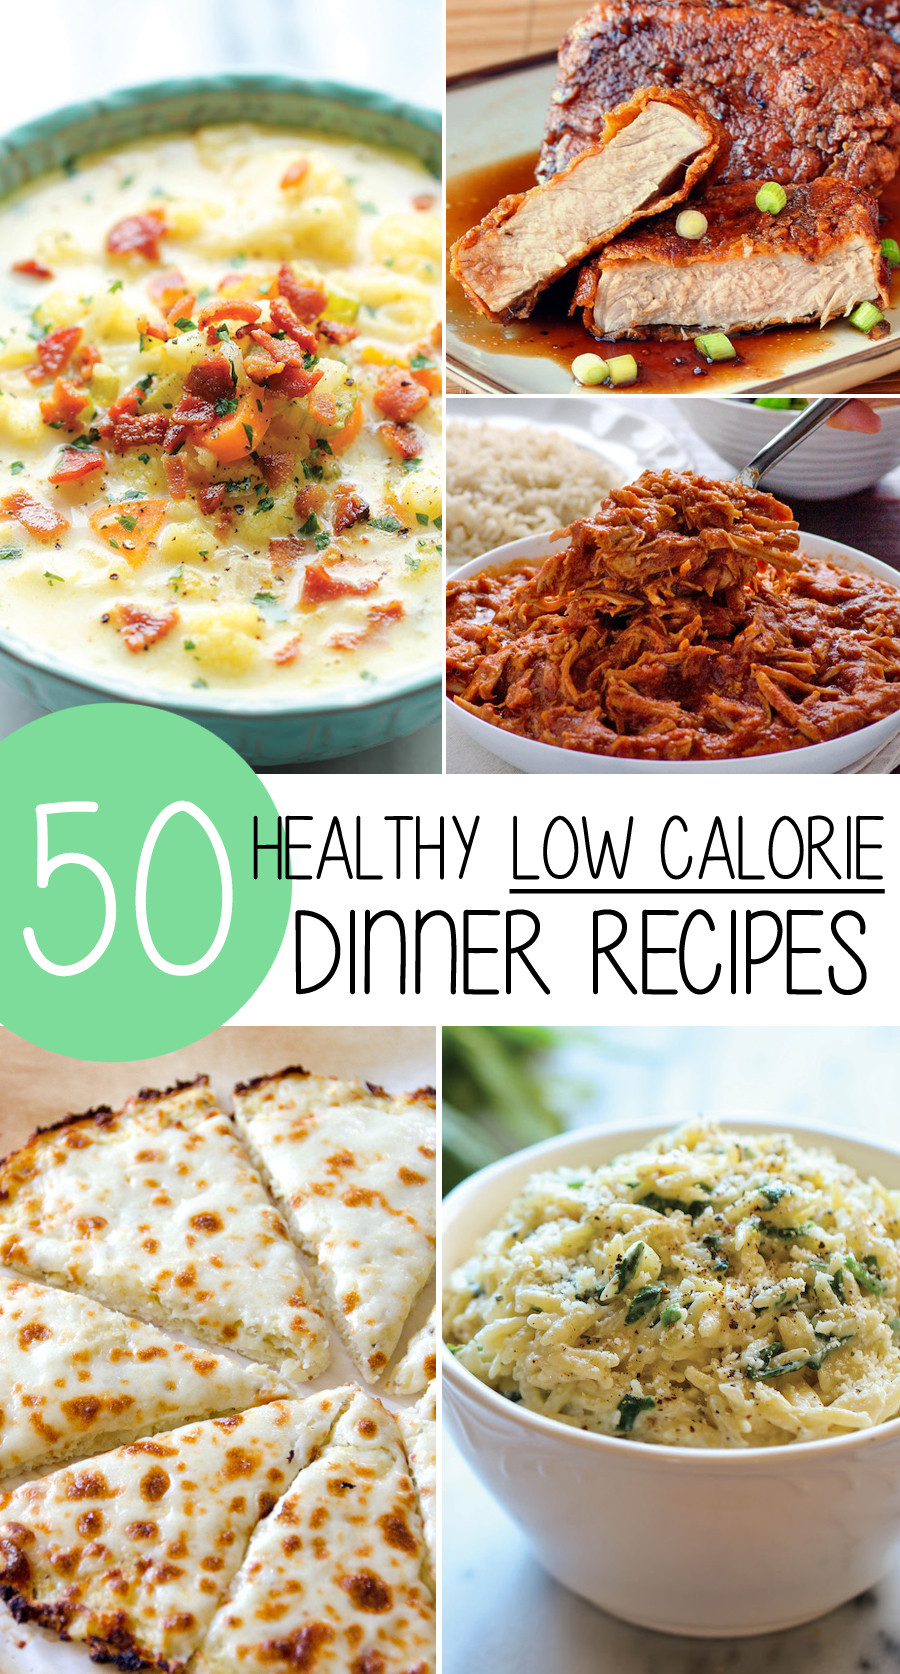 Healthy Low Calorie Dinners top 20 50 Healthy Low Calorie Weight Loss Dinner Recipes